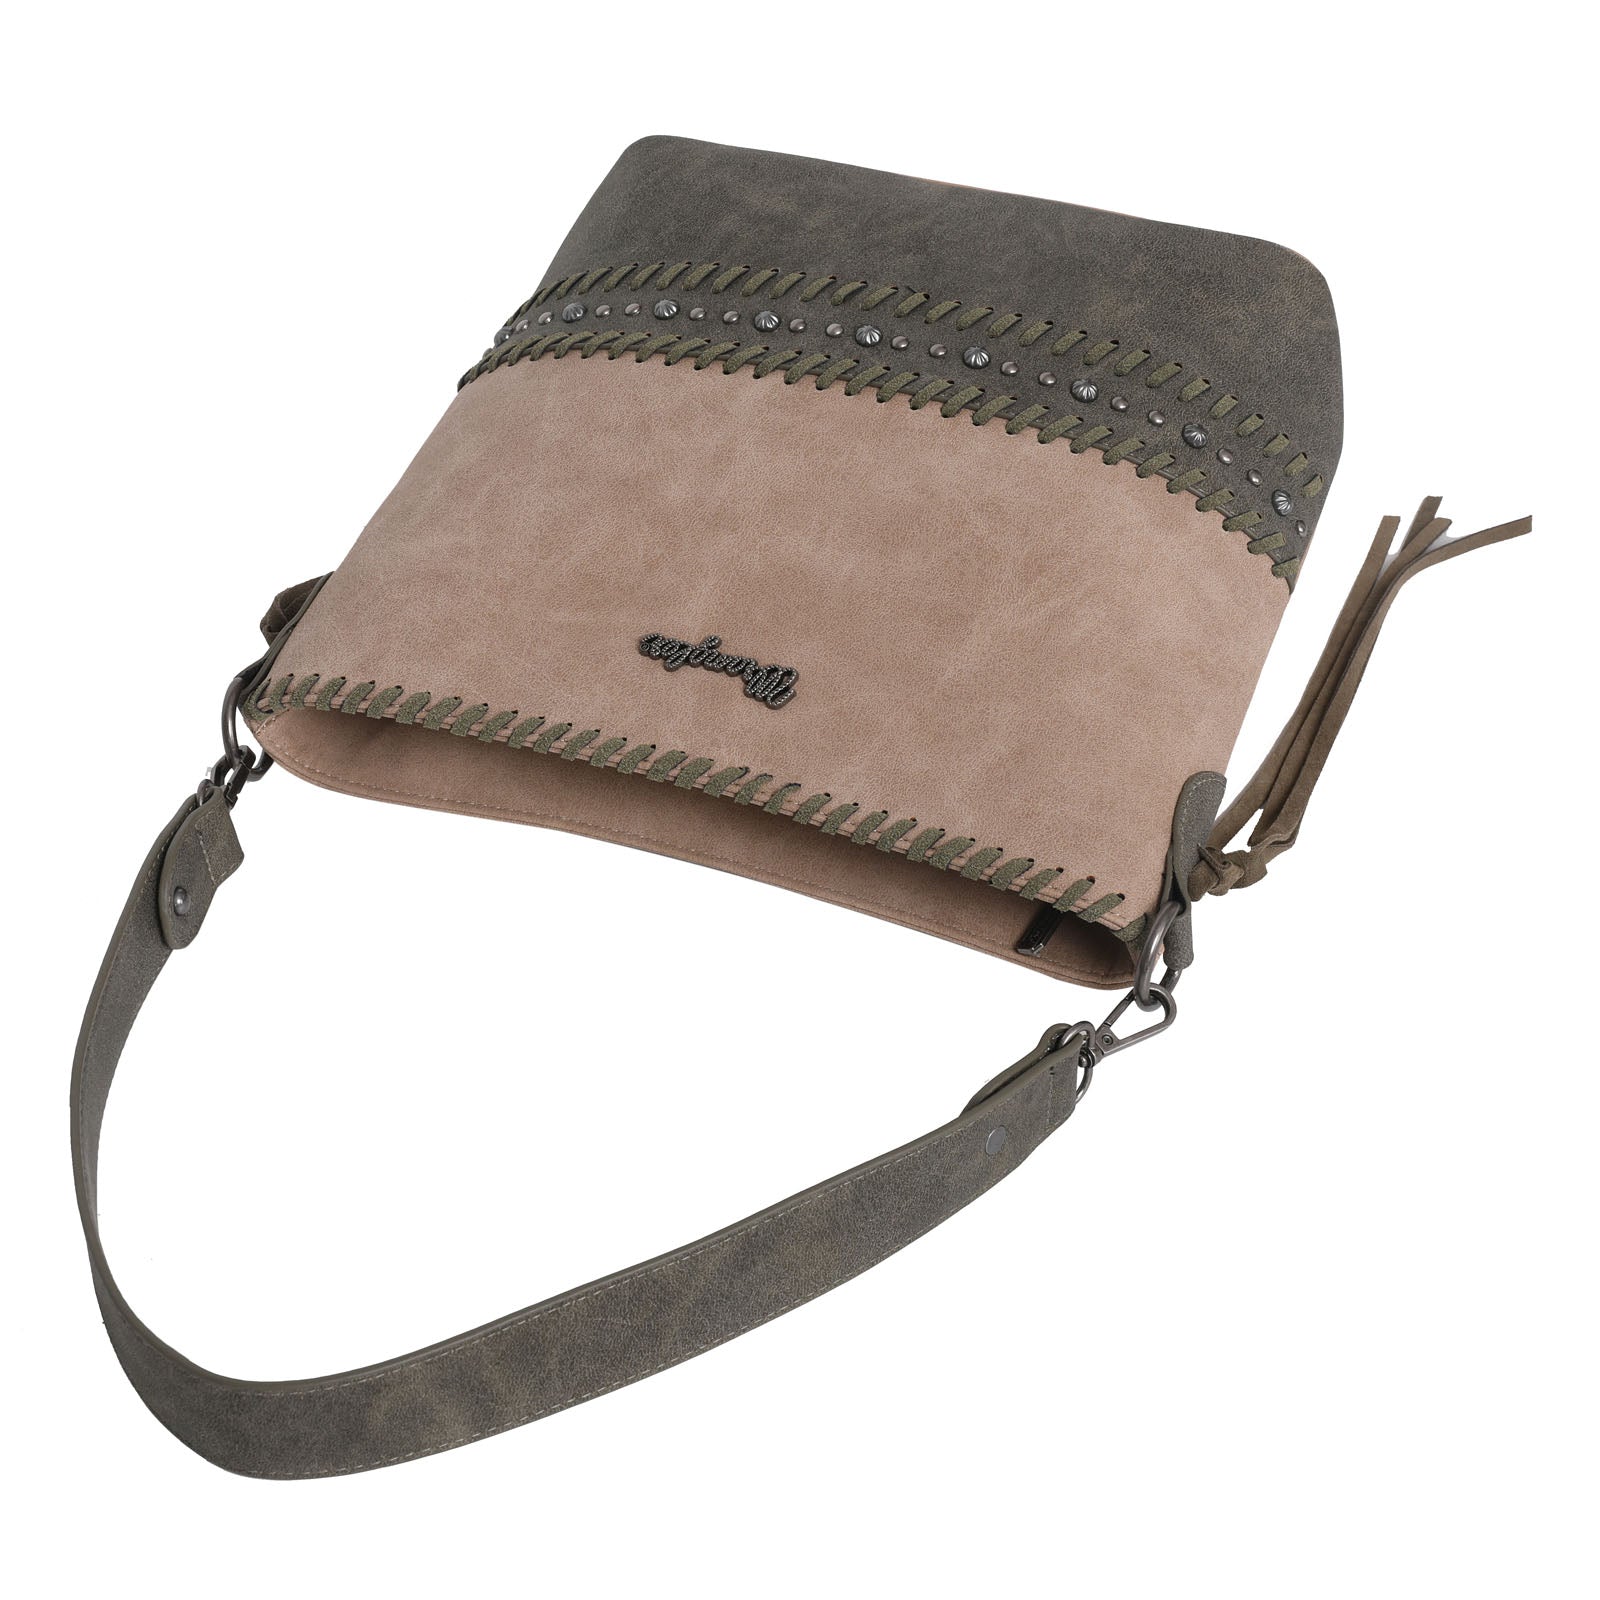 Wrangler Fringe and Studs Concealed Carry Hobo - Cowgirl Wear